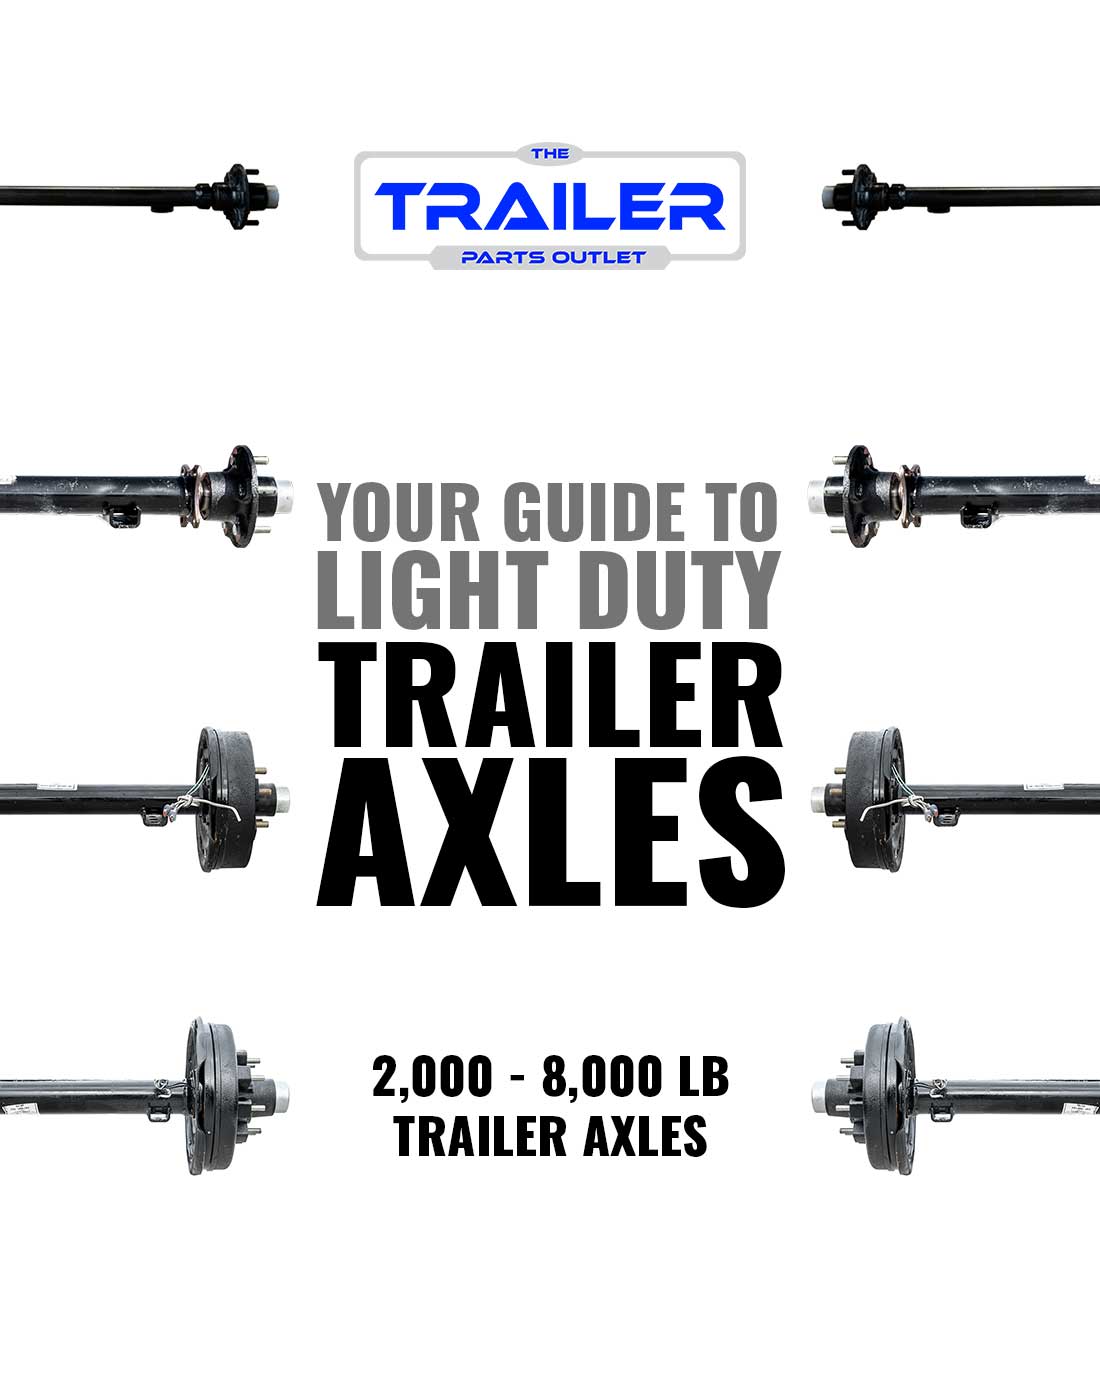 2000 - 8000 pound trailer axles available at the trailer parts outlet